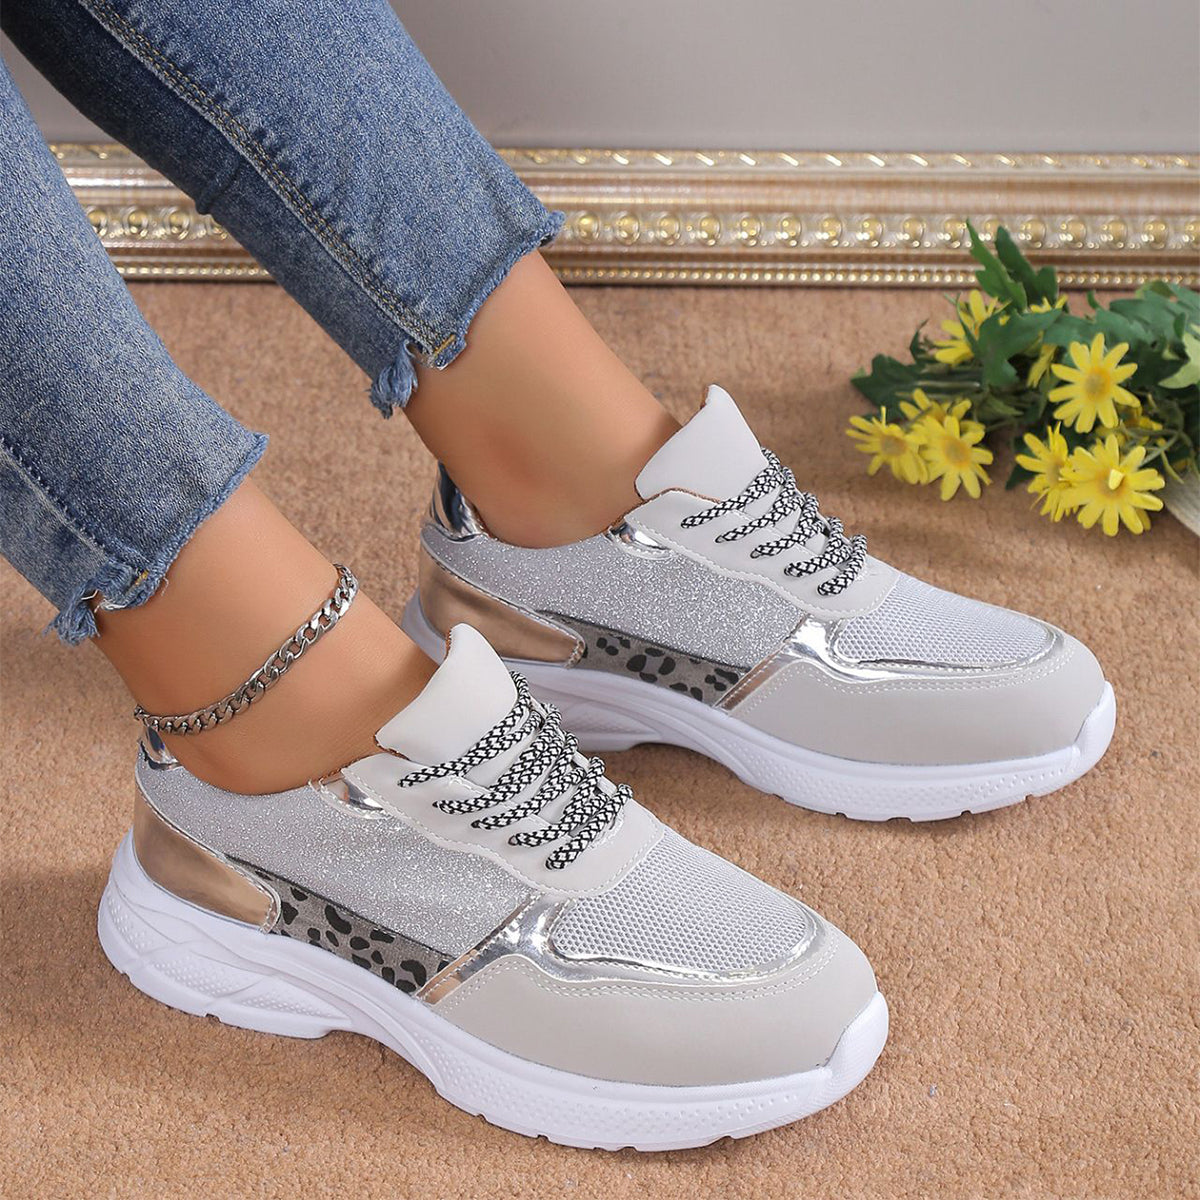 Lace Up Sneakers Breathable Mesh Flat Shoes Fashion Casual Lightweight